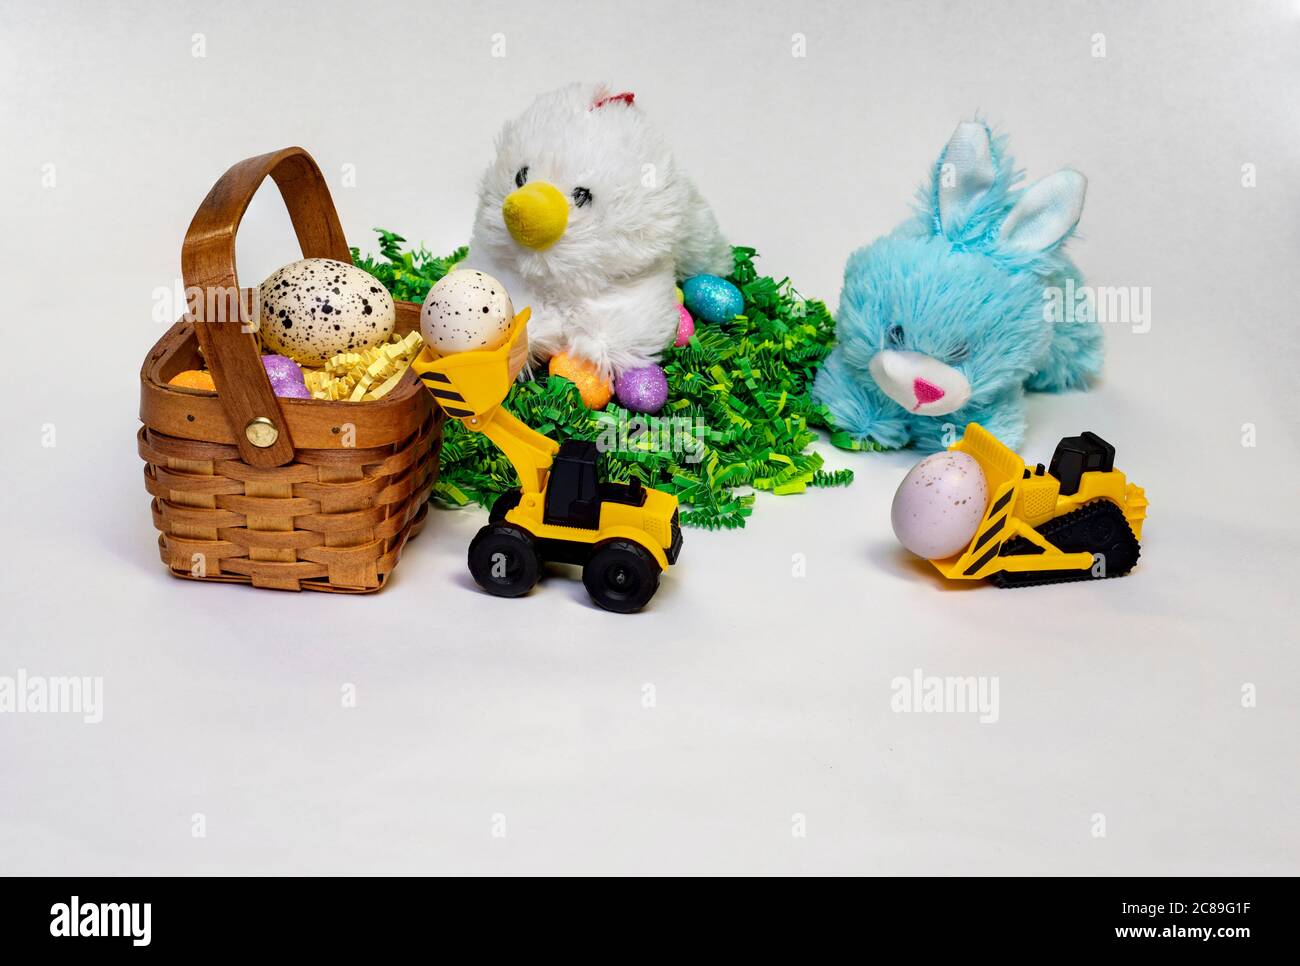 Easter themed photo of stufed bunny and hen with decorated Easter eggs, a basket,  and a child's toy construction vehicles. Stock Photo